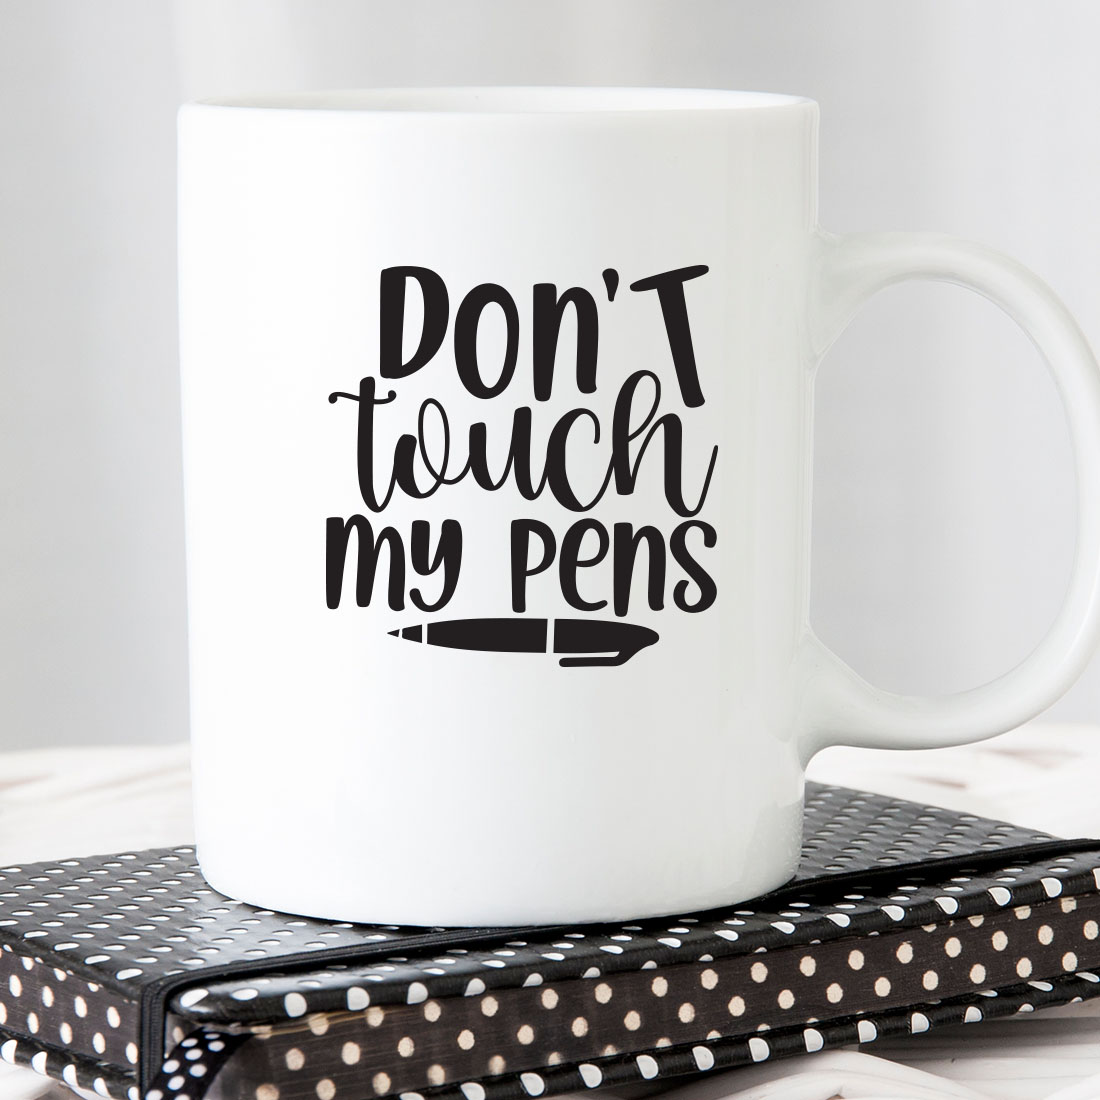 White coffee mug that says don't touch my pens.